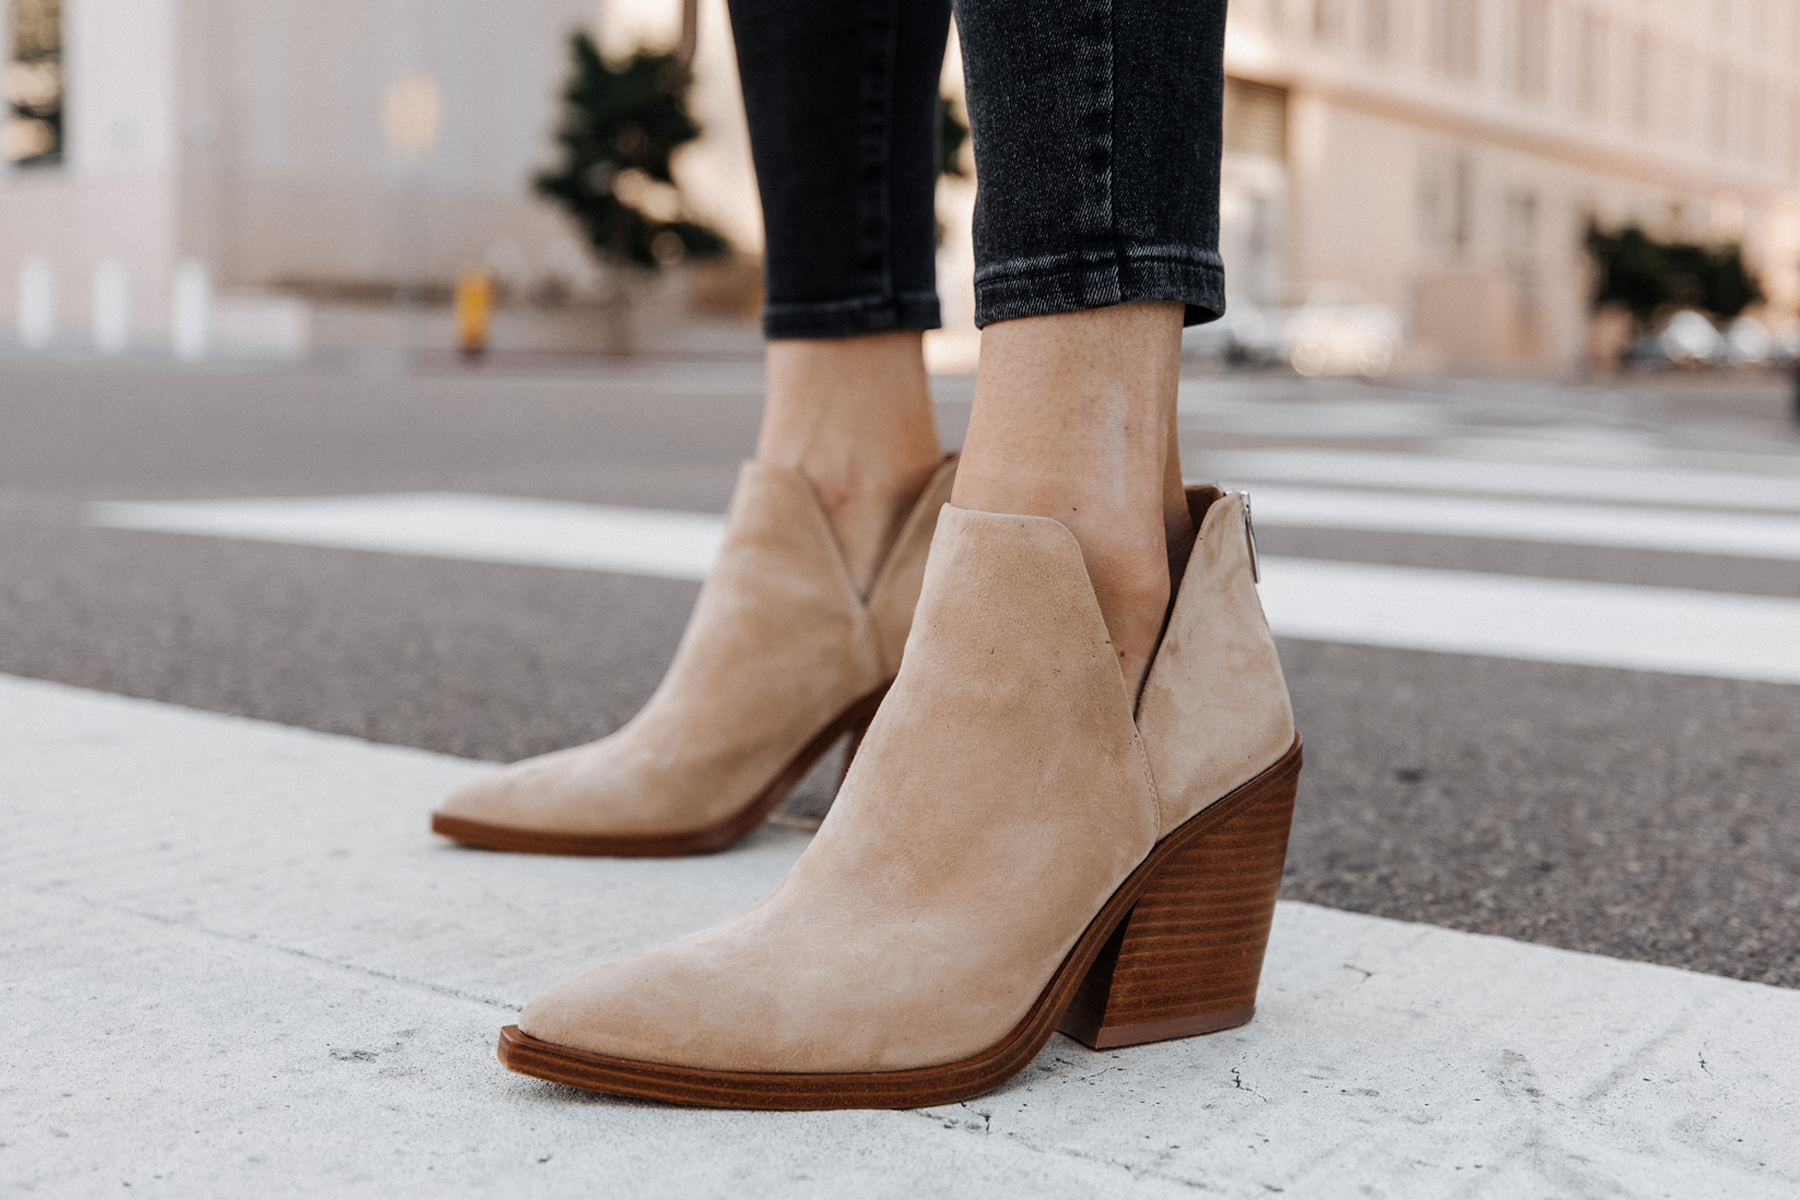 Fashion Jackson Wearing Vince Camuto Gigetta Booties Tortilla Suede